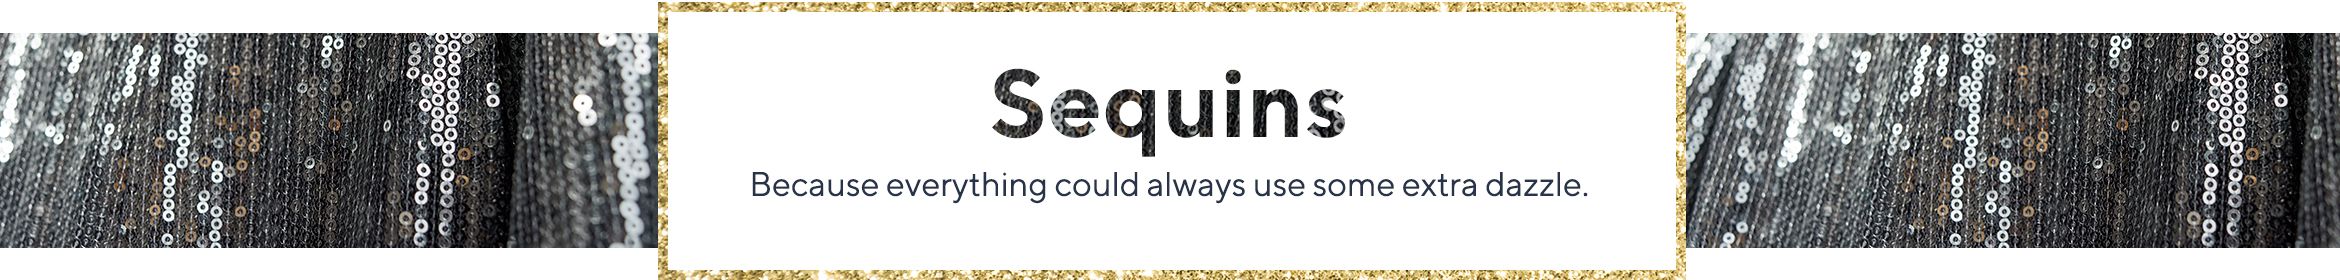 Sequins - Because everything could always use some extra dazzle.